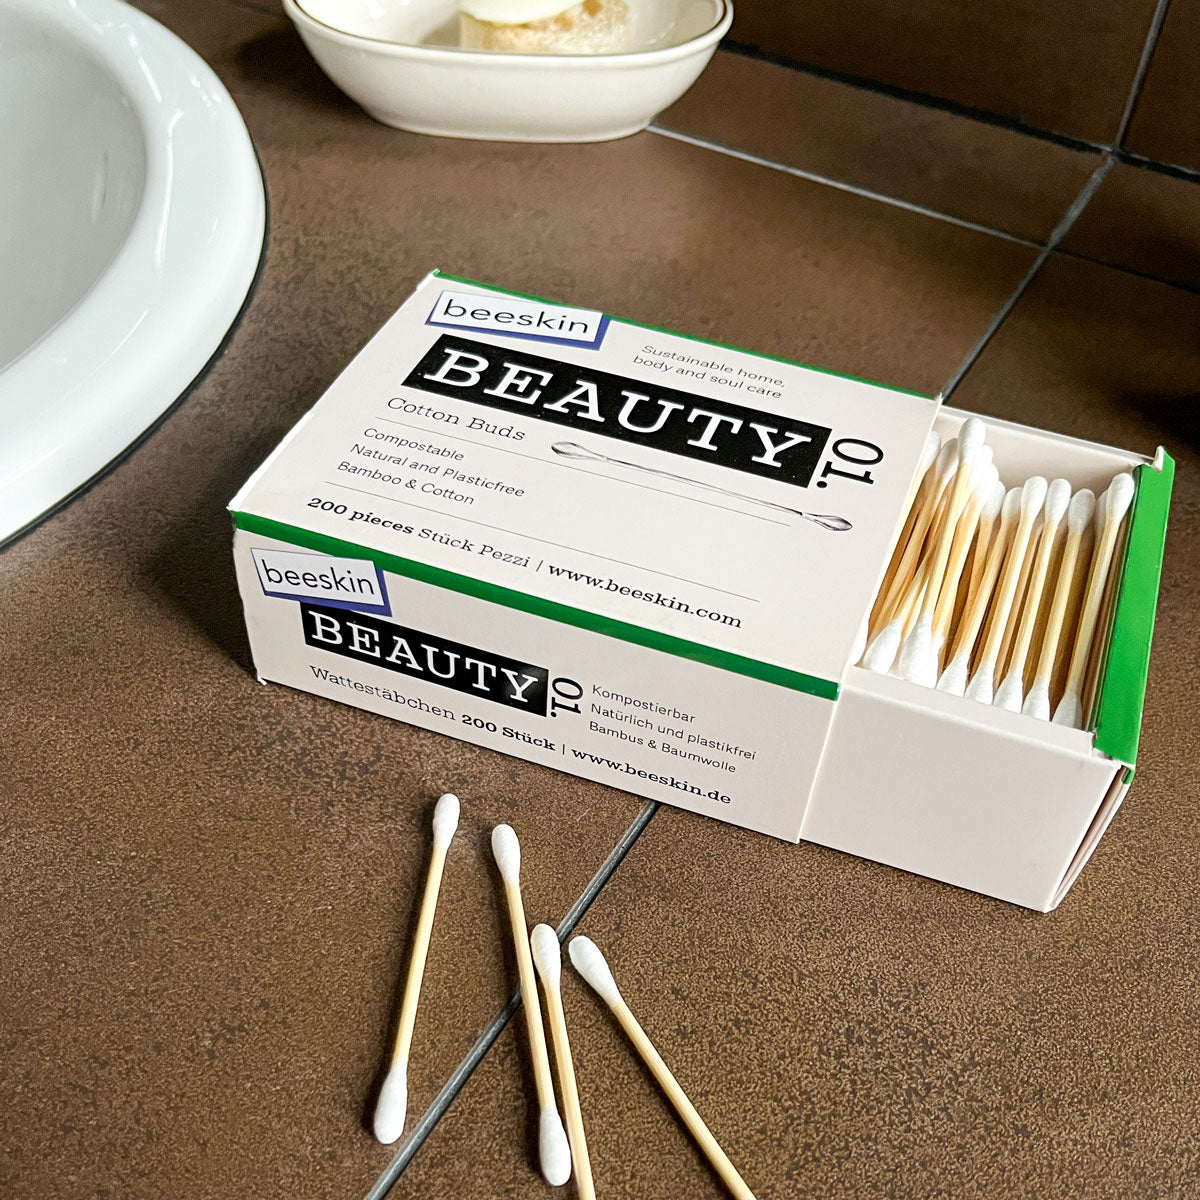 box of beeskin cotton buds in the bathroom